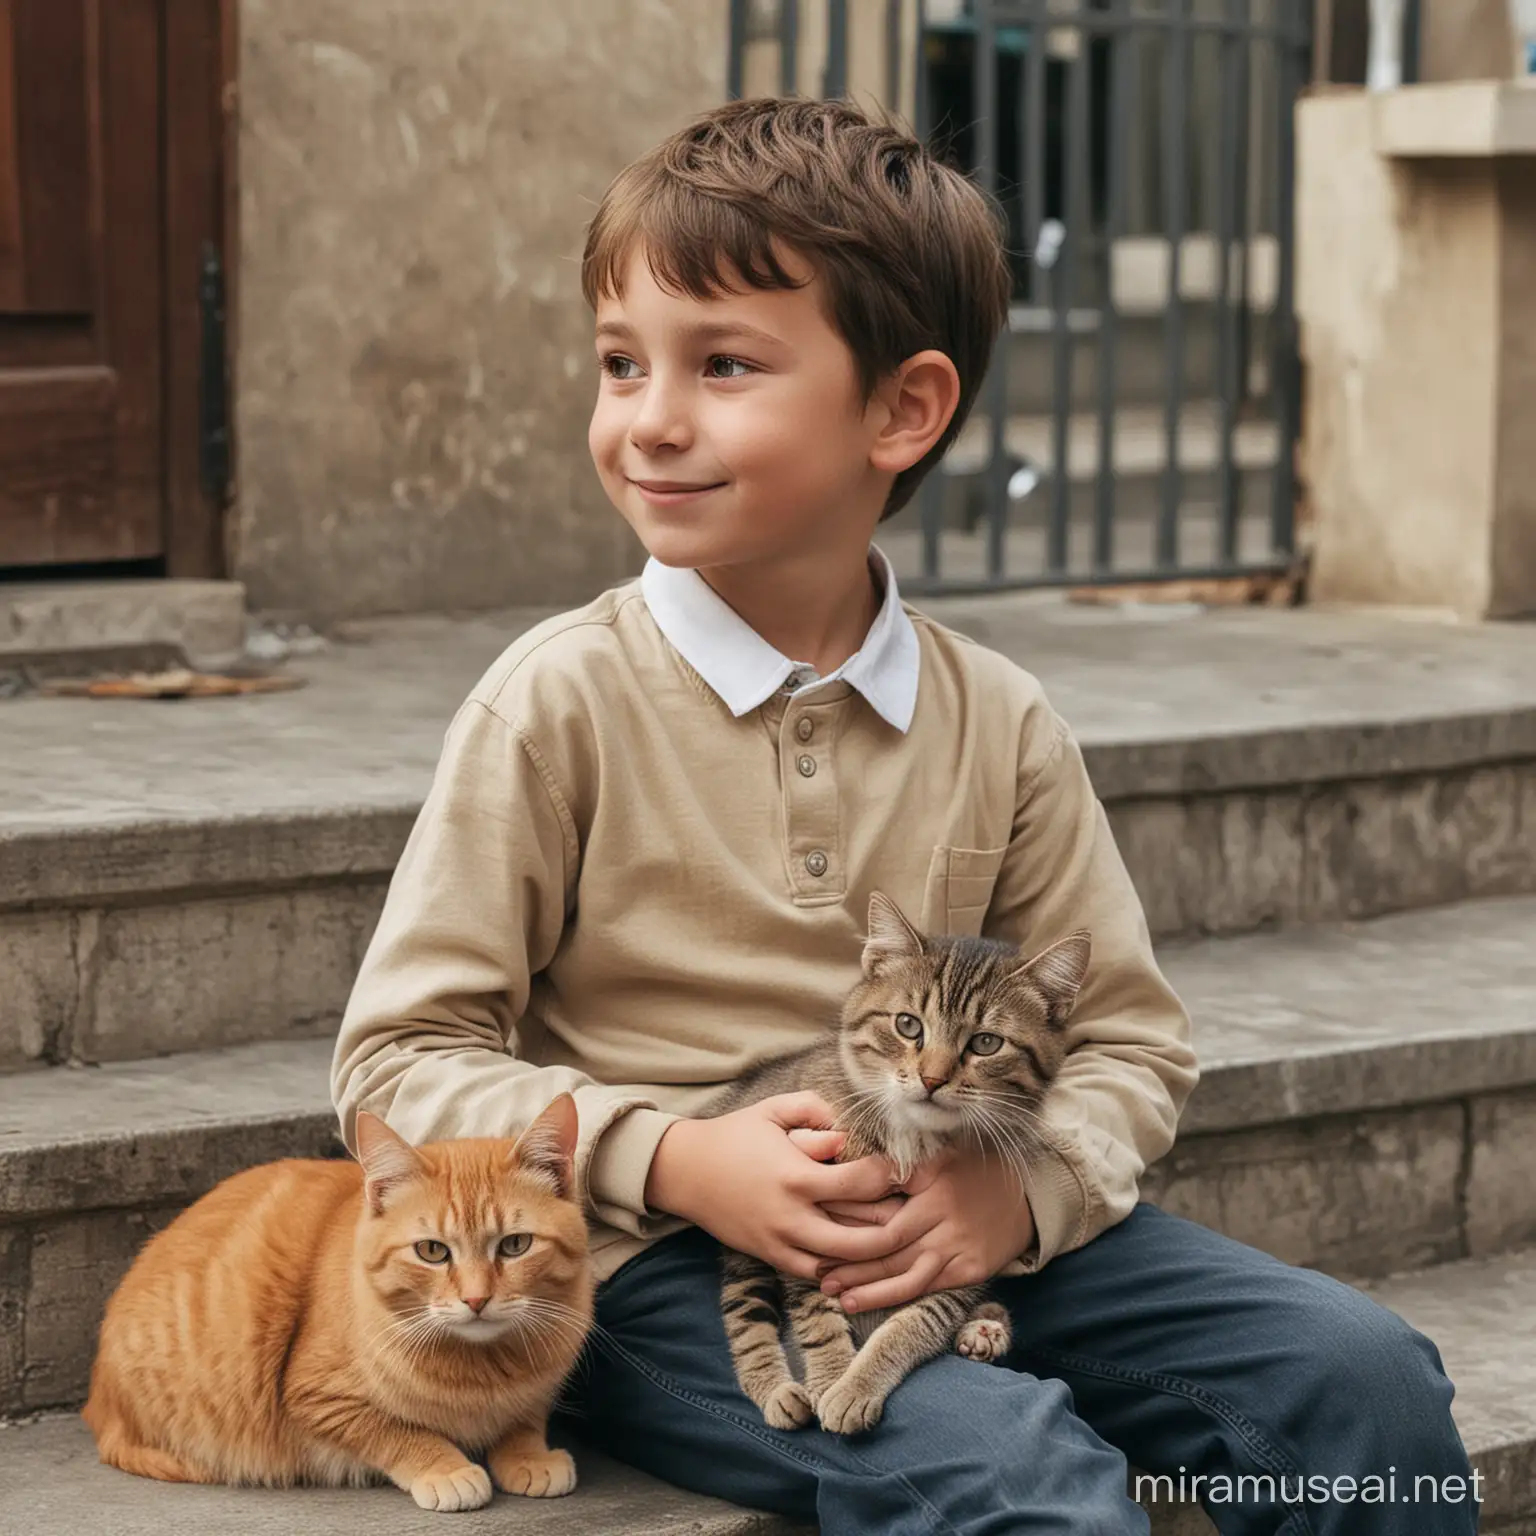 Boy Sitting with Cat Serene Moment of Companionship